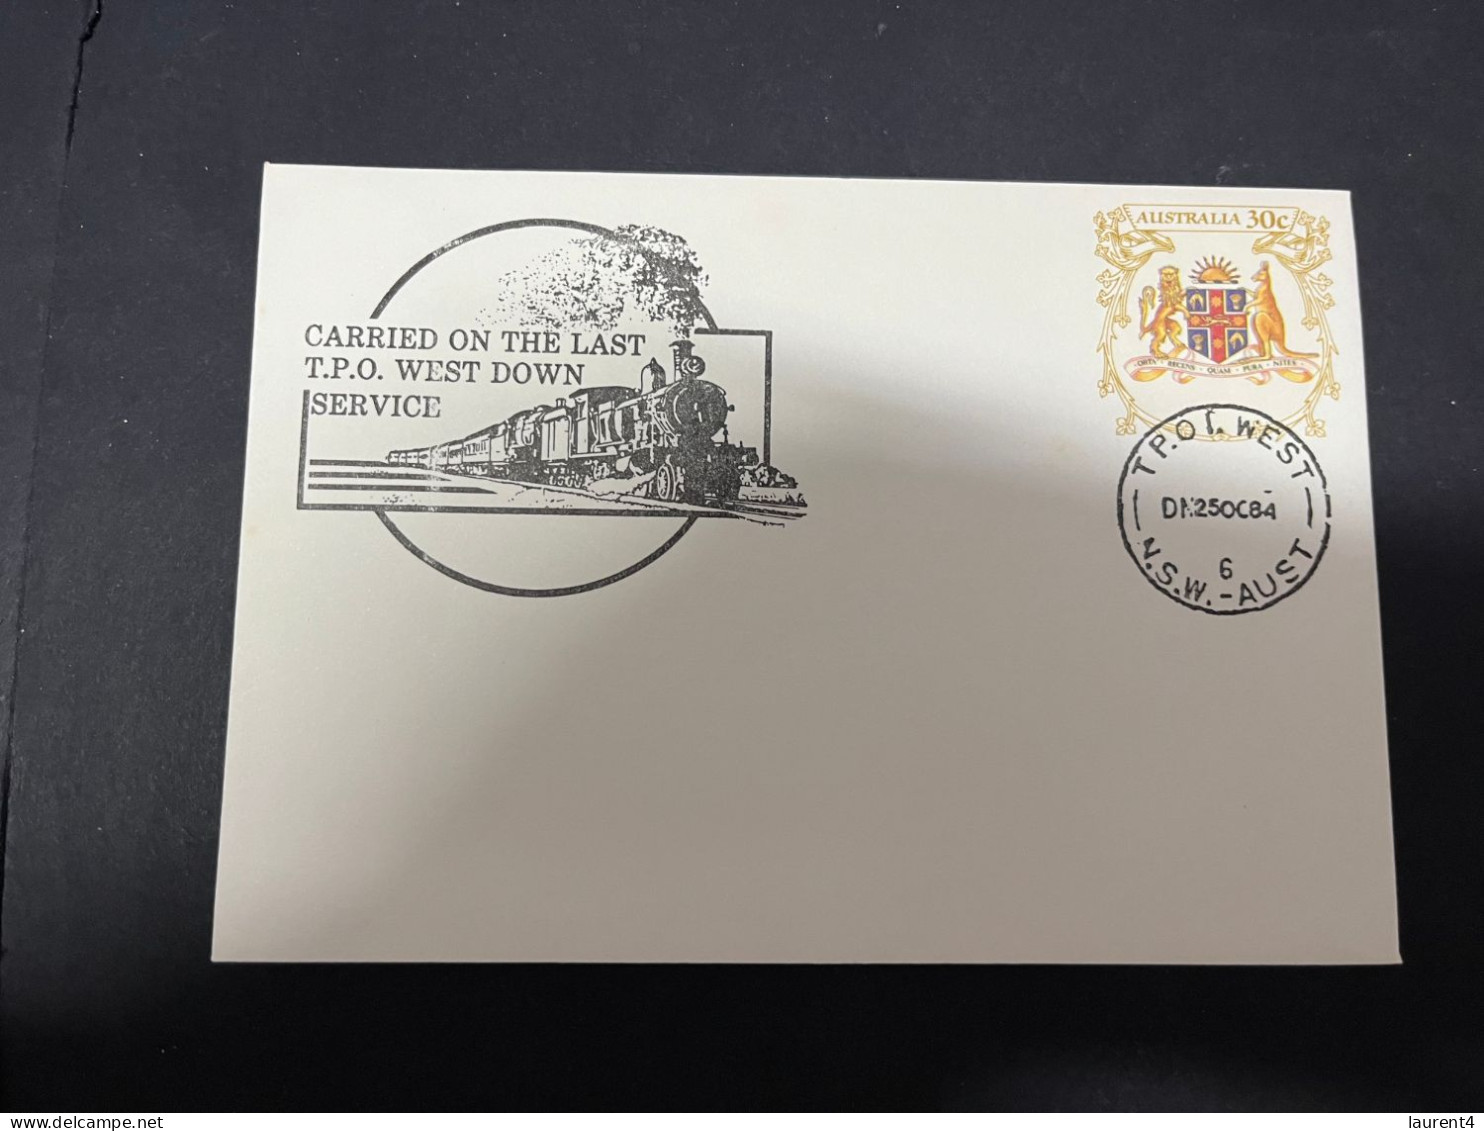 30-4-2023 (3 Z 29) Australia FDC (2 Covers) 1984 - Carried On The Last T.P.O. Service (mail Train) - FDC